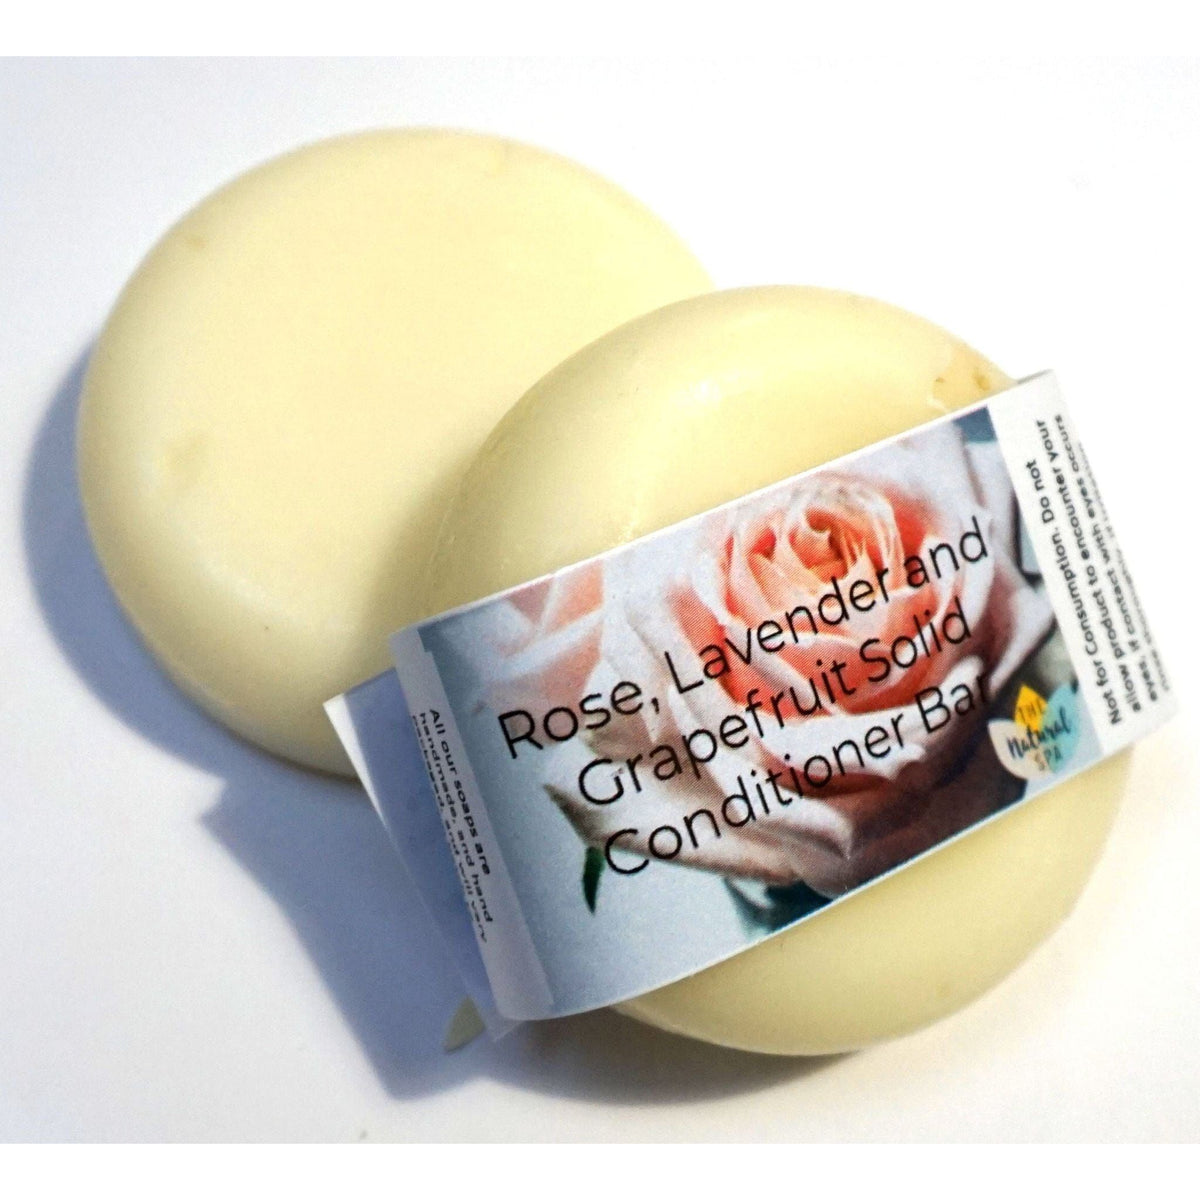 The Natural Spa Rose, Lavender and Grapefruit Conditioner Bar